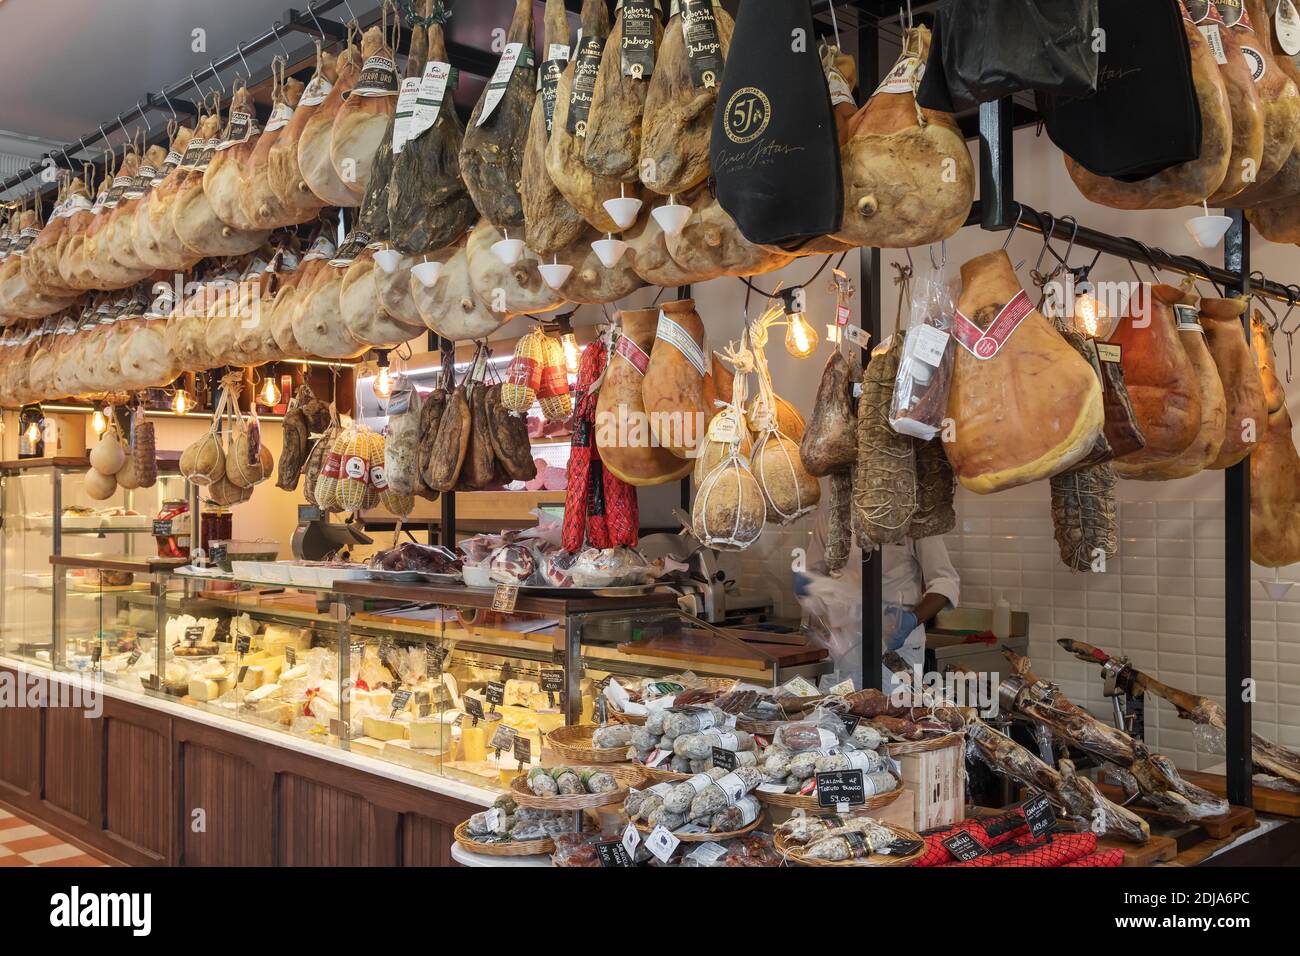 Traditional italian gastronomy shop with variable types of meat and cheese. Stock Photo